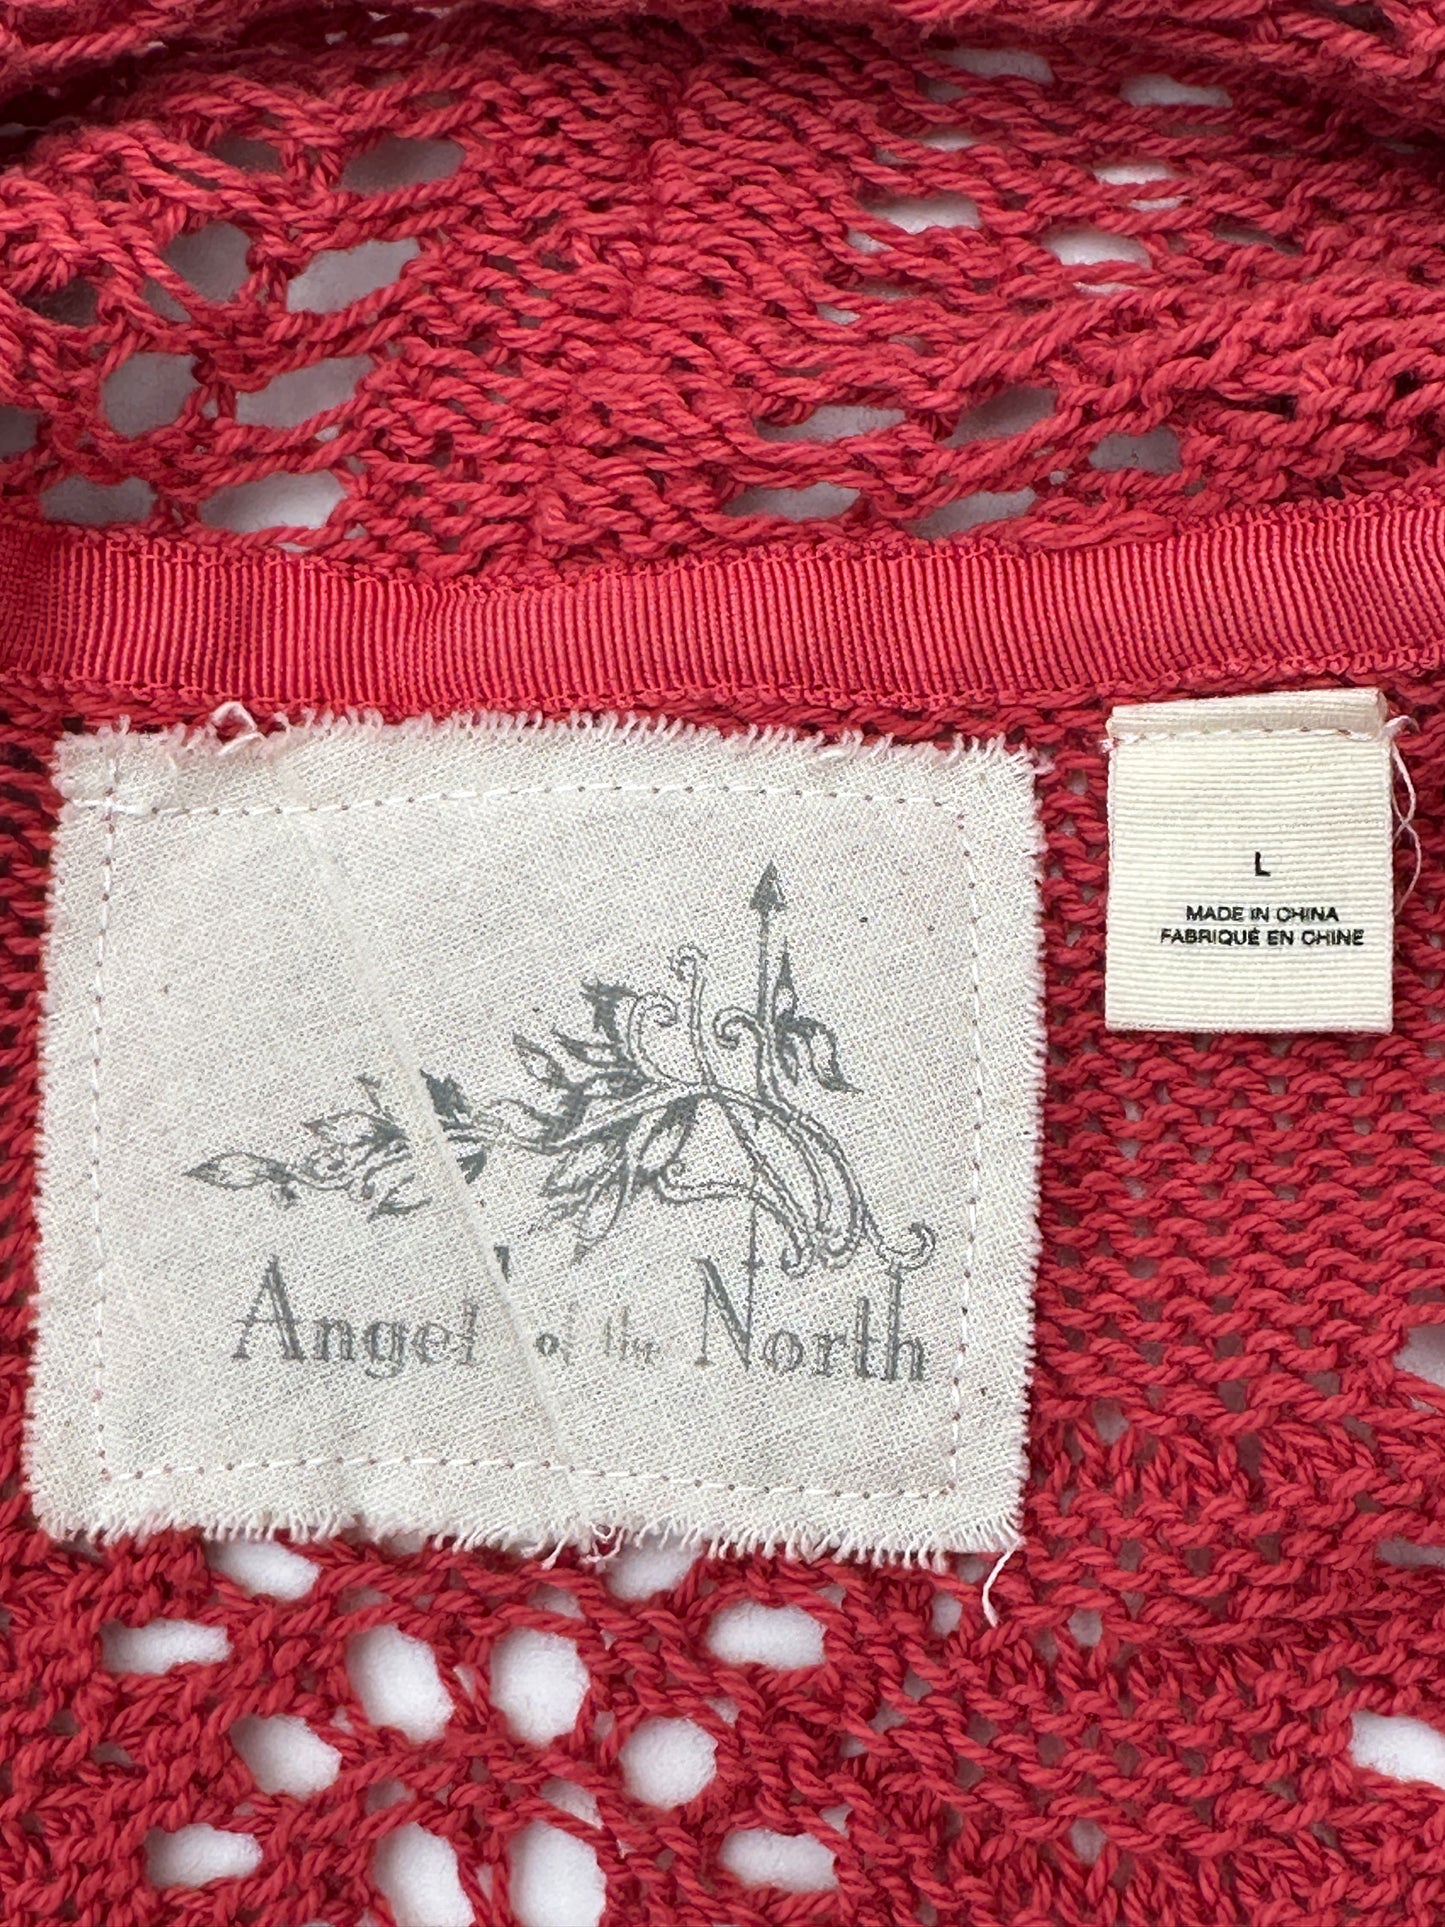 Angel of the North Size L Dark Coral Salmon Open-Knit Long Cardigan Sweater